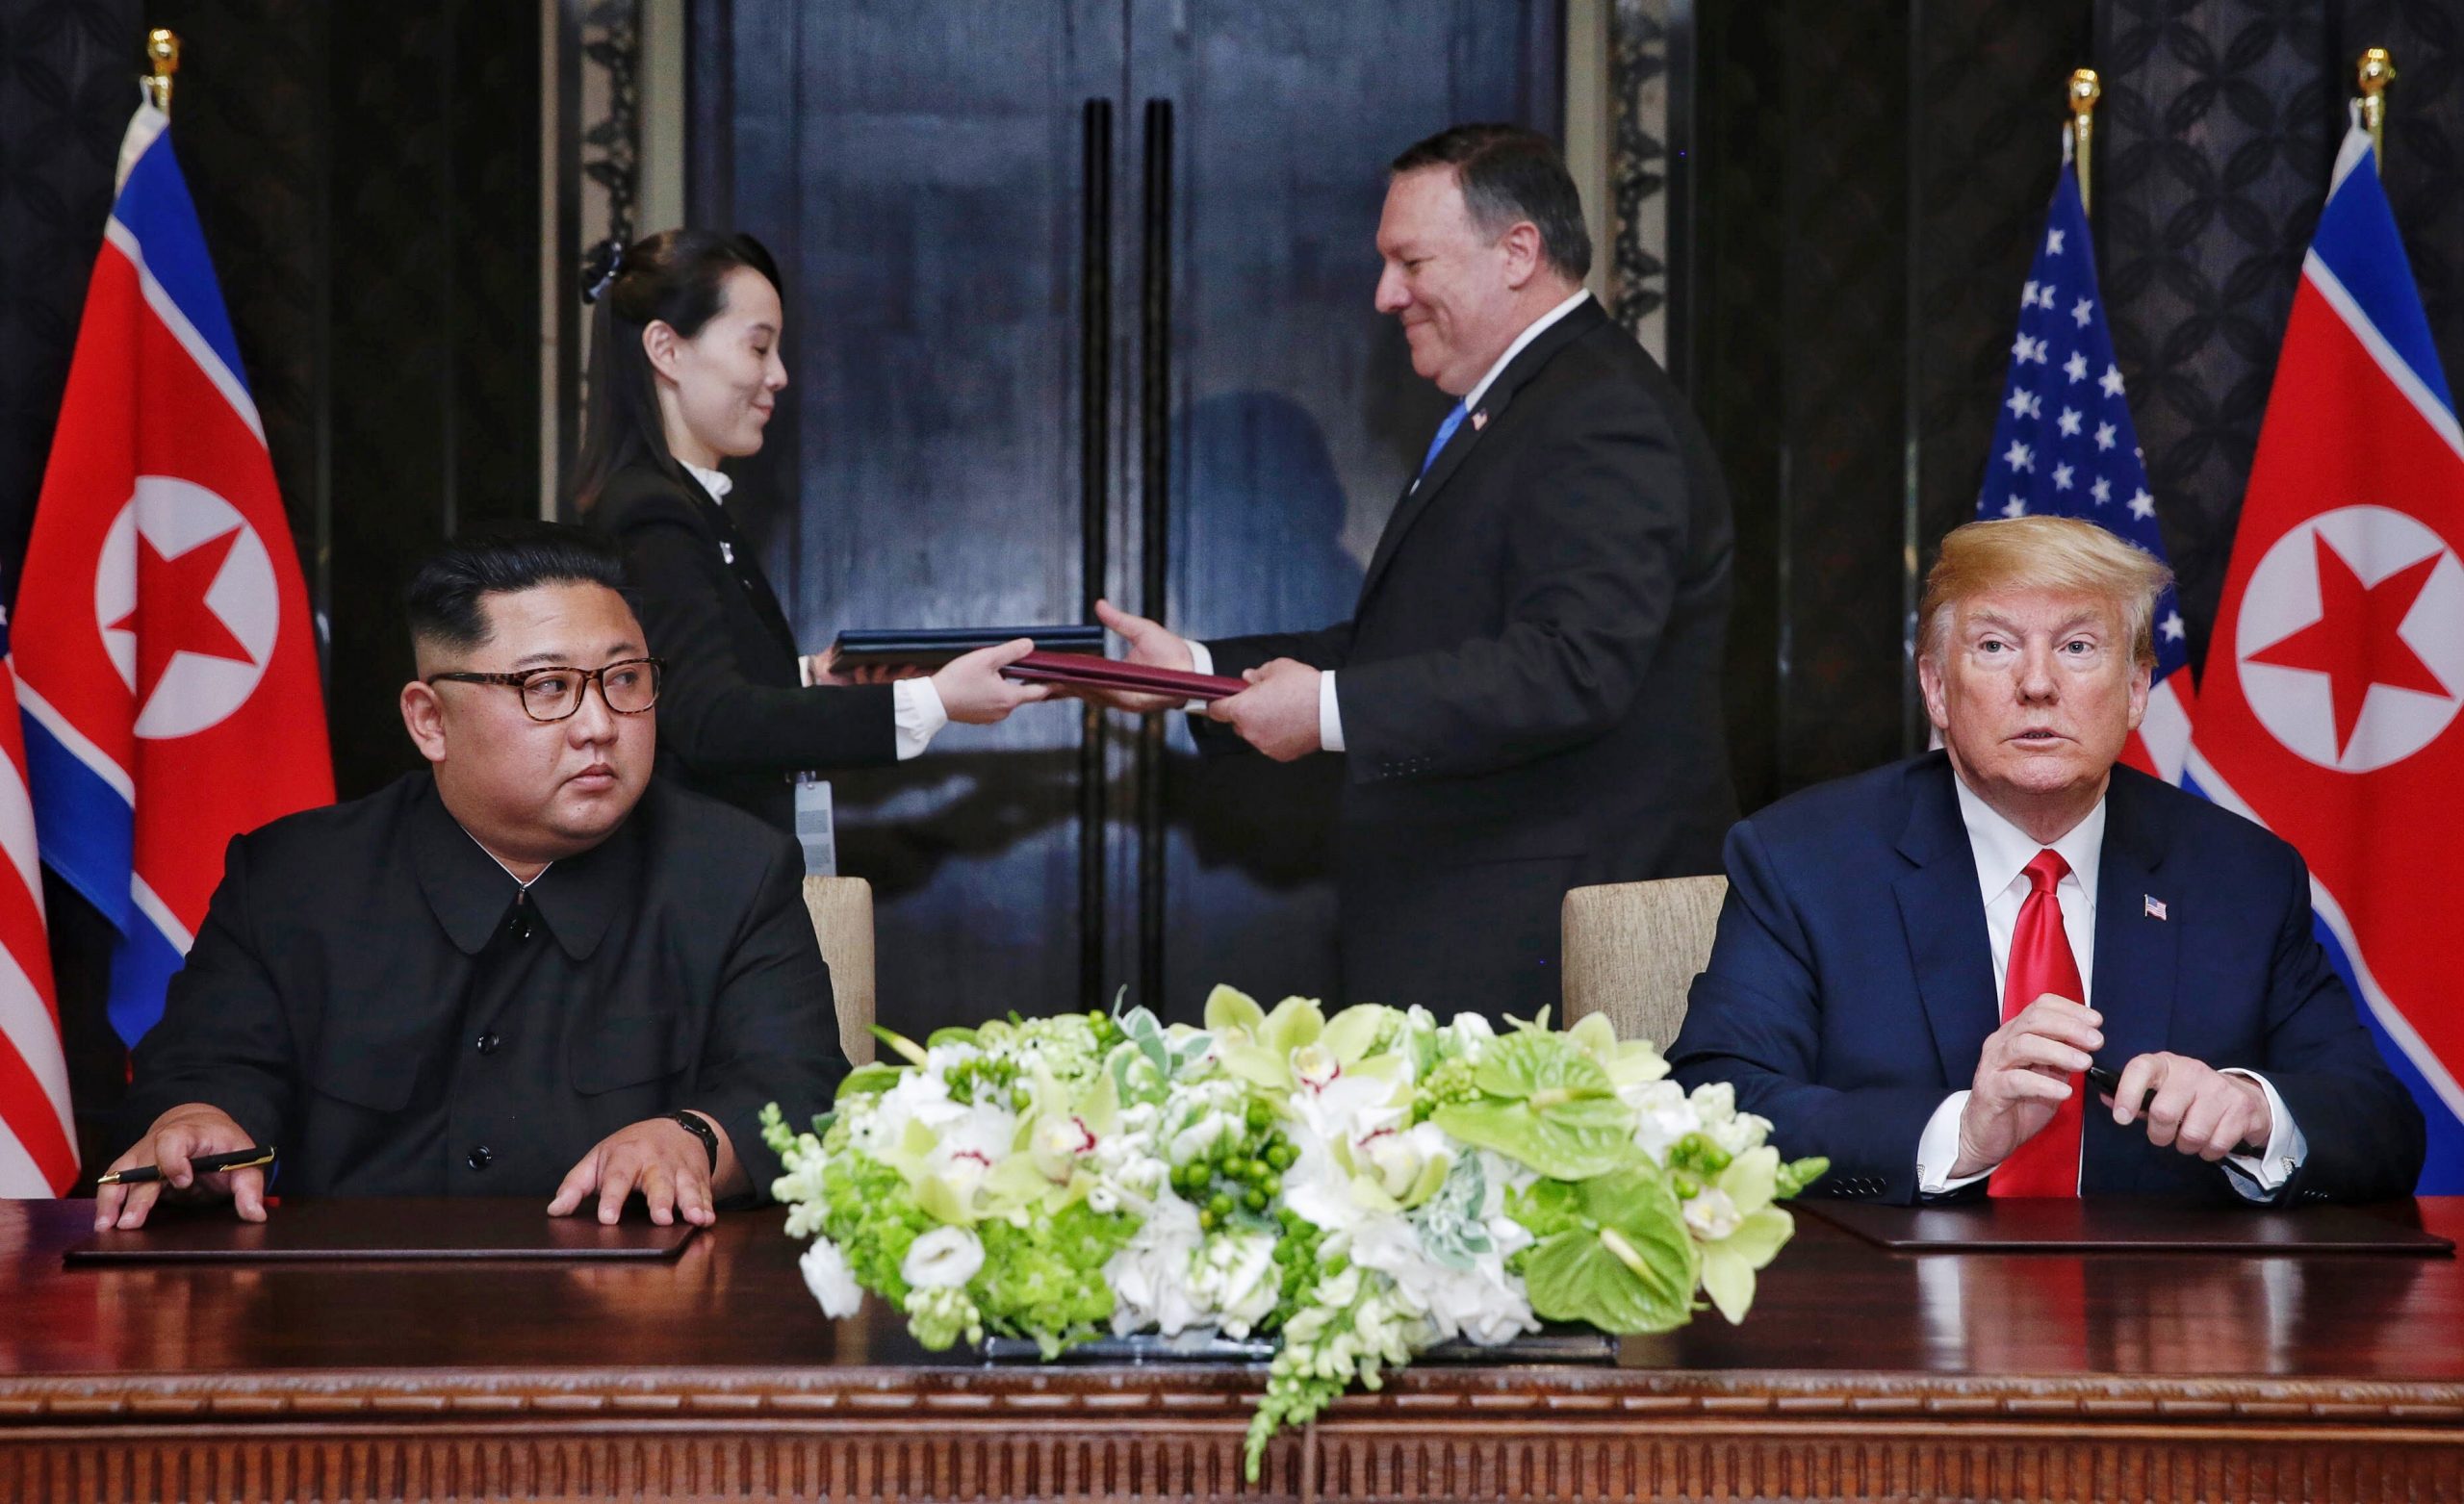 epa08095886 PICTURES OF THE DECADE 

A document being exchanged between US Secretary of State Mike Pompeo (2-R) and North Korean leader's sister Kim Yo Jong (2-L) moments after it was signed by President Donald J. Trump (R) and North Korean Chairmain Kim Jong-un (L) during their first meeting, at the Capella Hotel on Sentosa Island, Singapore, 12 June 2018.  EPA/KEVIN LIM / THE STRAITS TIMES   EDITORIAL USE ONLY